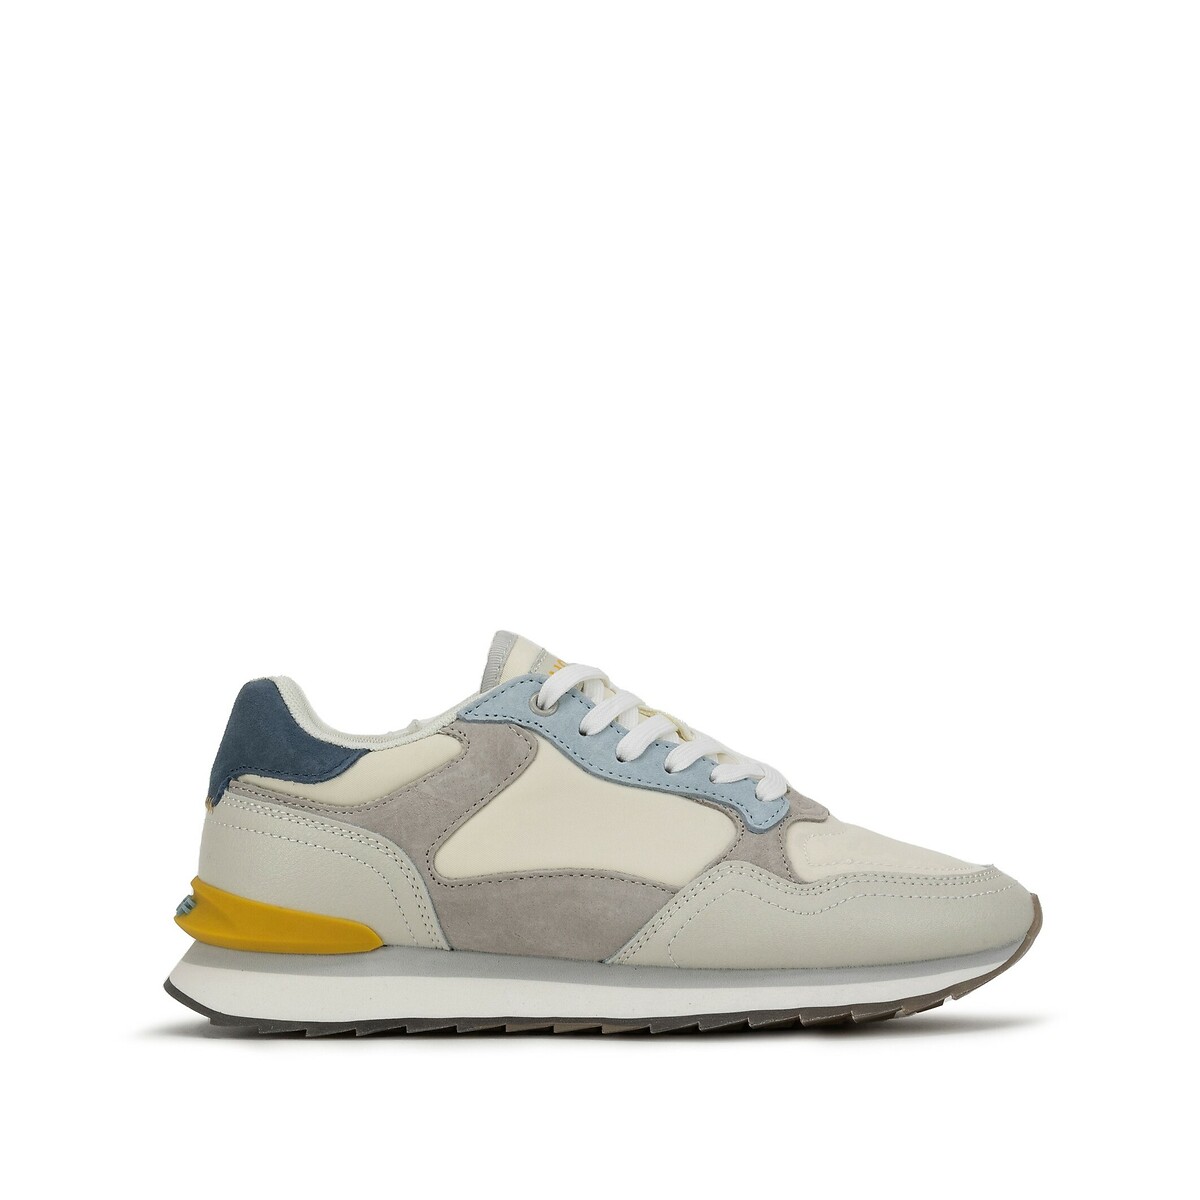 City Saint Tropez Trainers in Suede